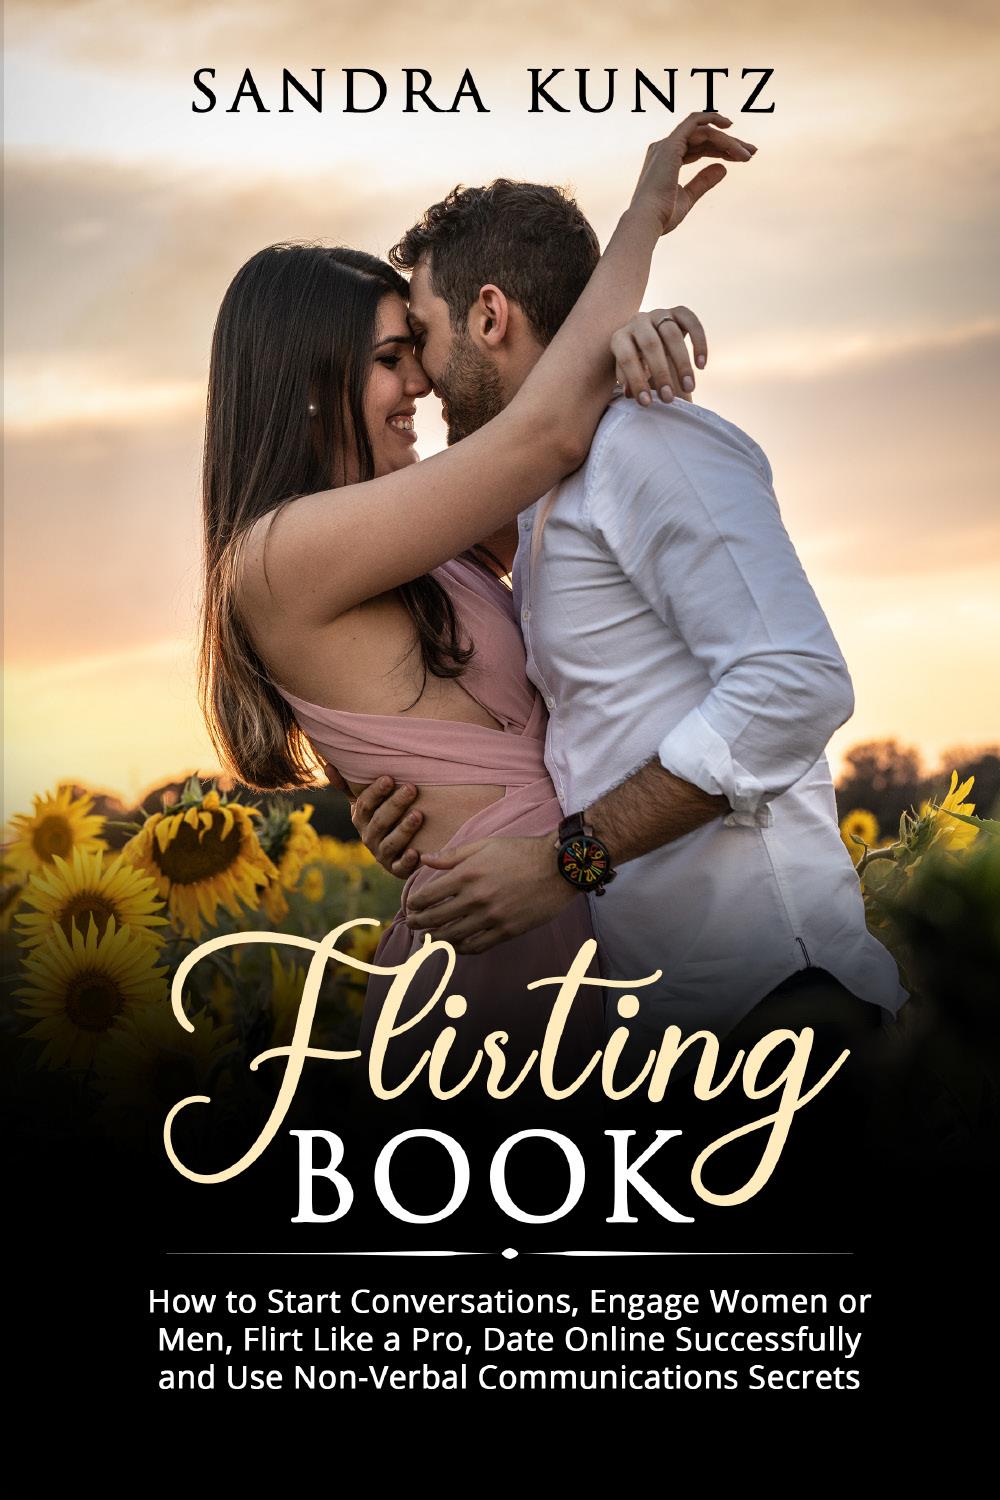 Flirting Book. How to Start Conversations, Engage Women or Men, Flirt Like a Pro, Date Online Successfully and Use Non-Verbal Communications Secrets